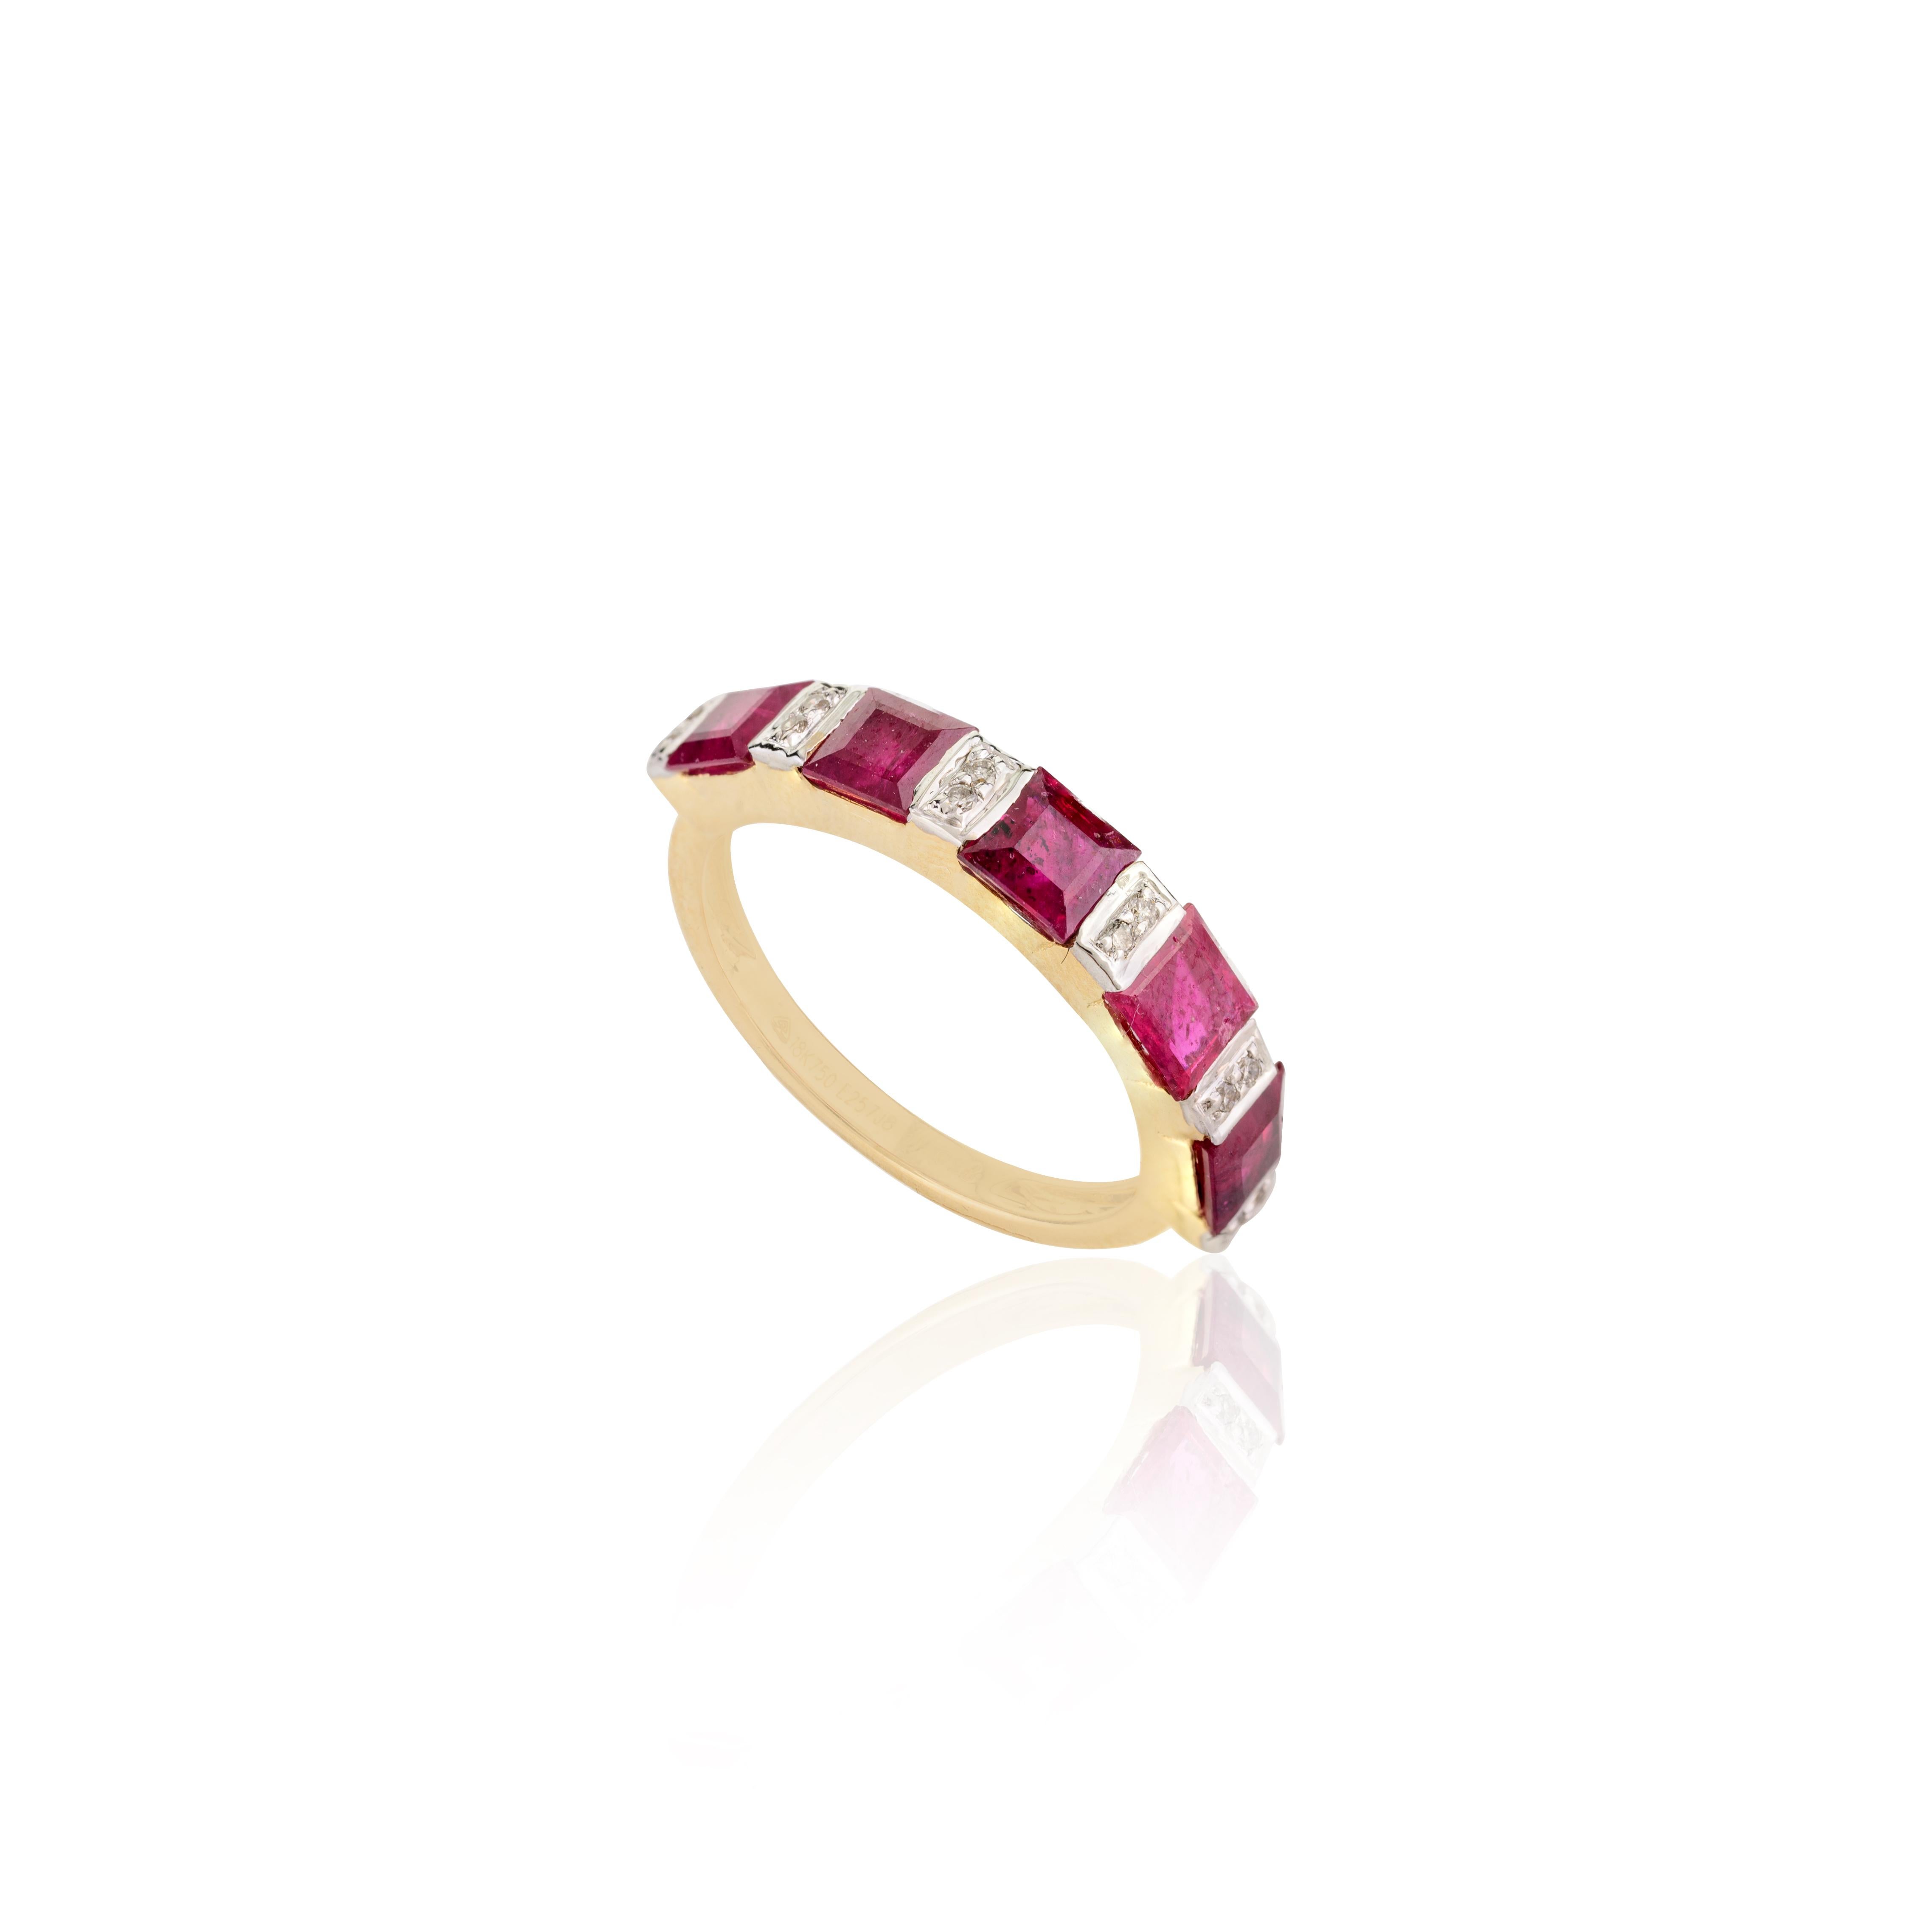 For Sale:  2.15ct Deep Red Ruby and Diamond Engagement Band Ring in 18k Solid Yellow Gold 7